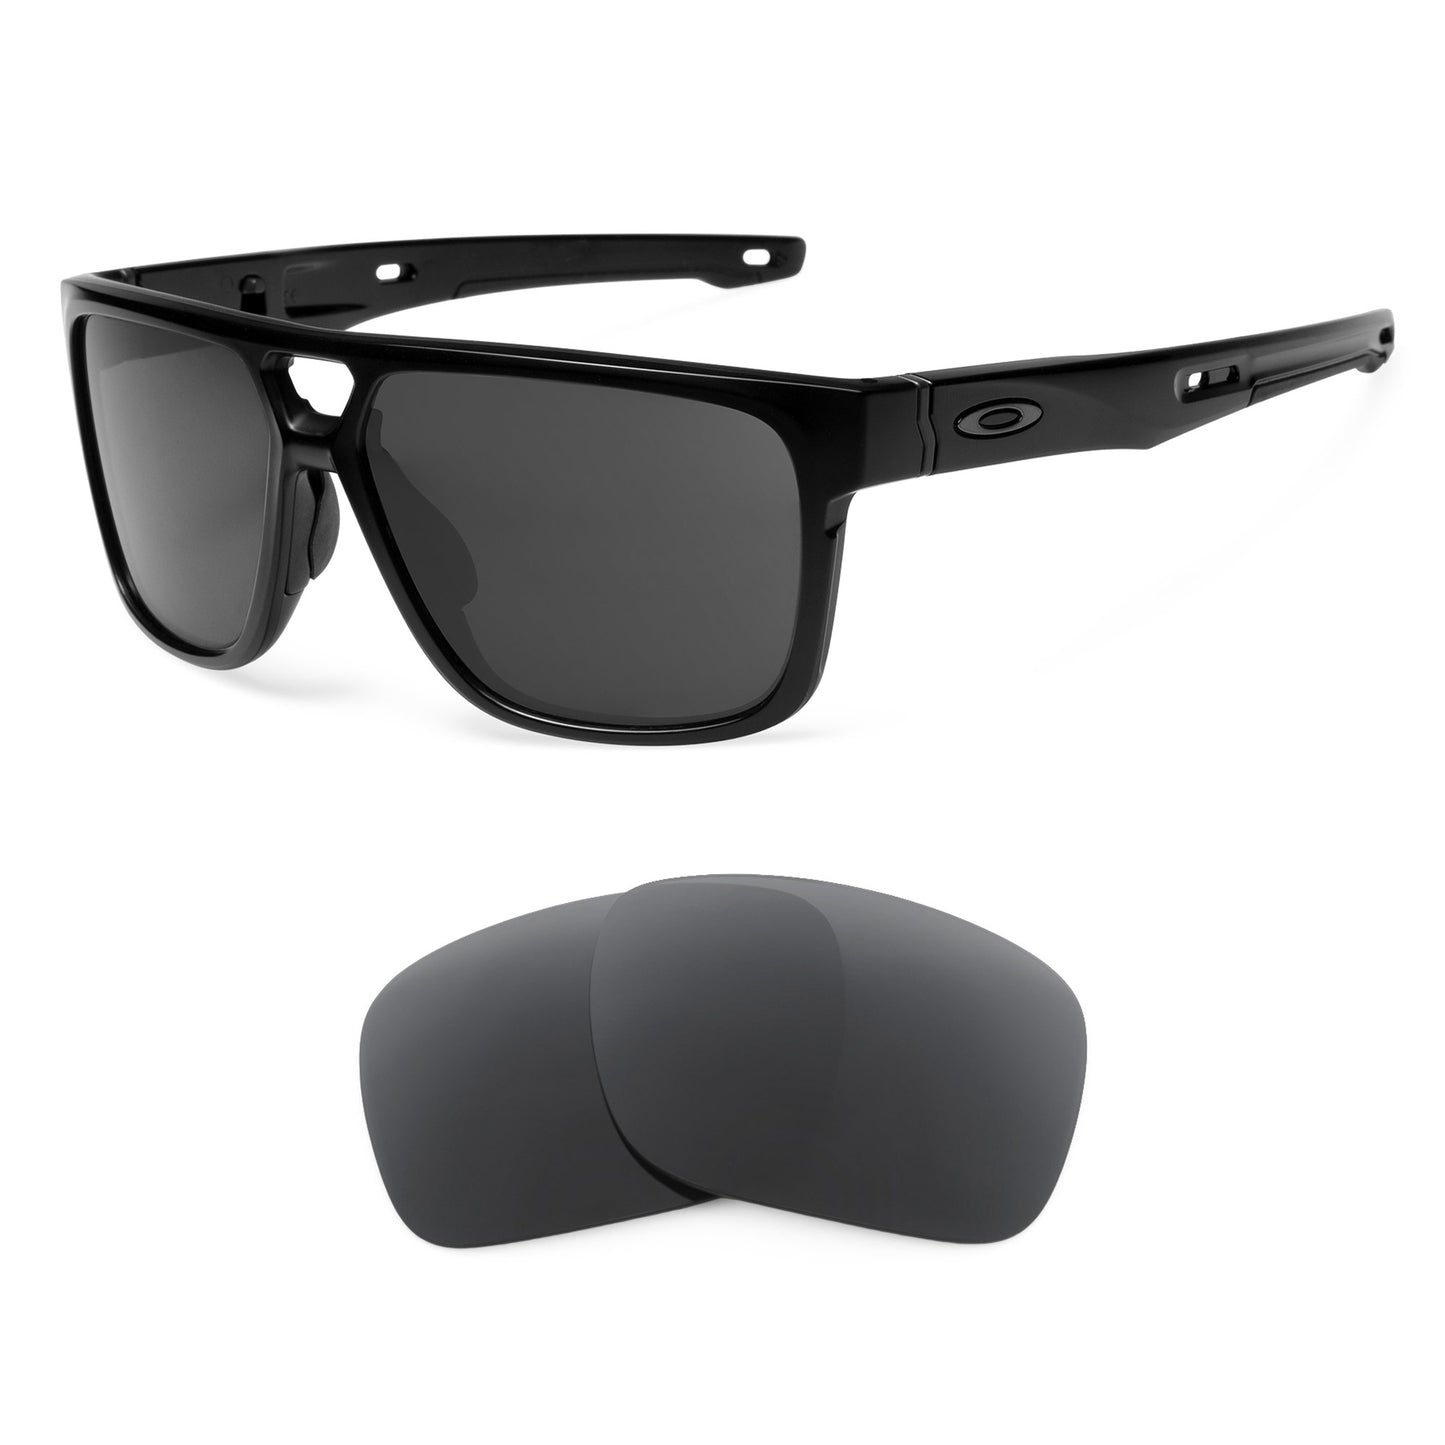 Oakley Crossrange Patch sunglasses with replacement lenses